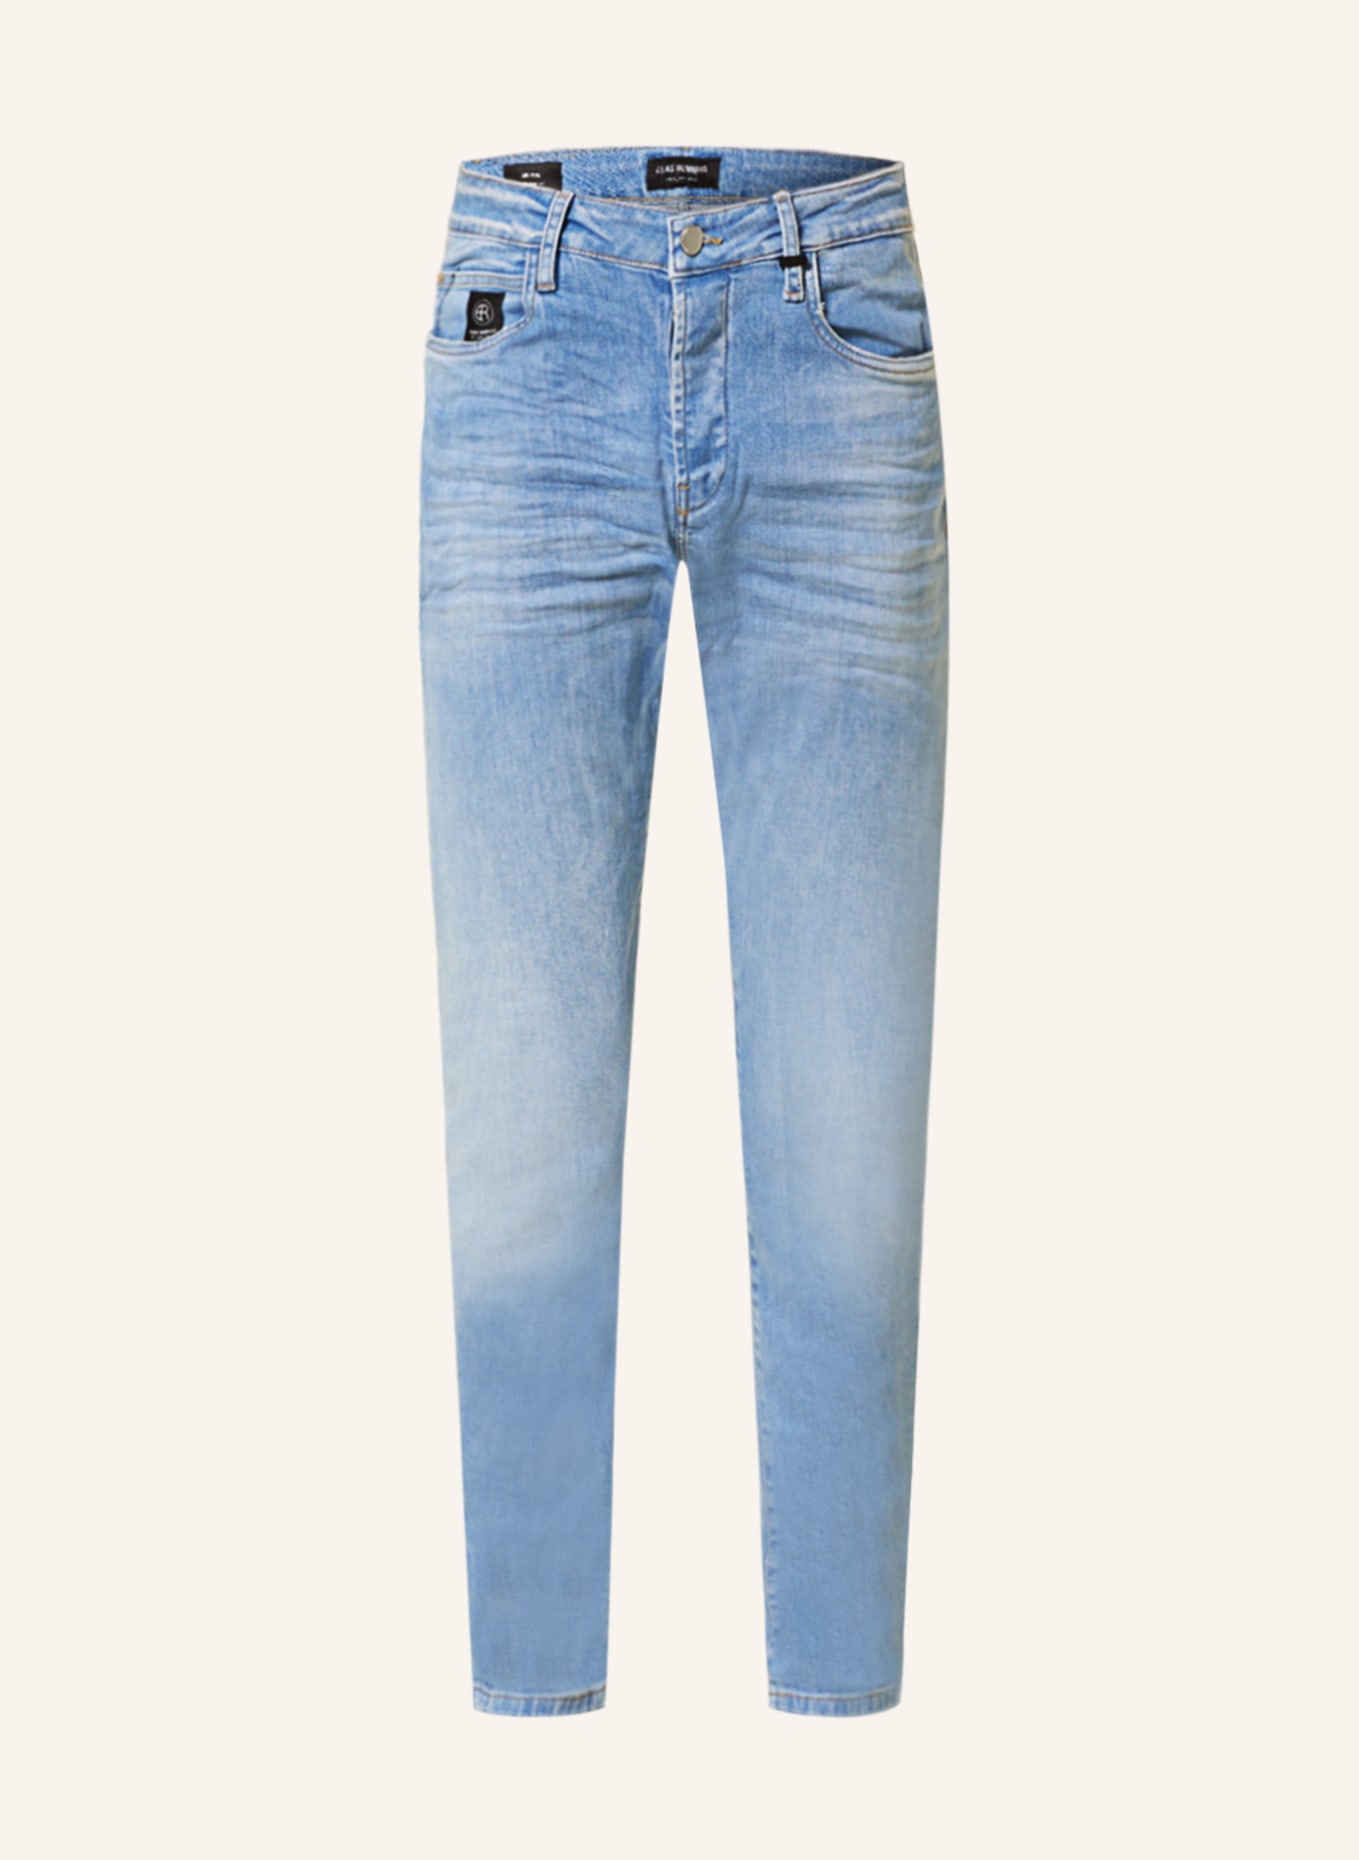 ELIAS RUMELIS Jeans DAVE Tapered Fit, Farbe: 568 berry blue (Bild 1)